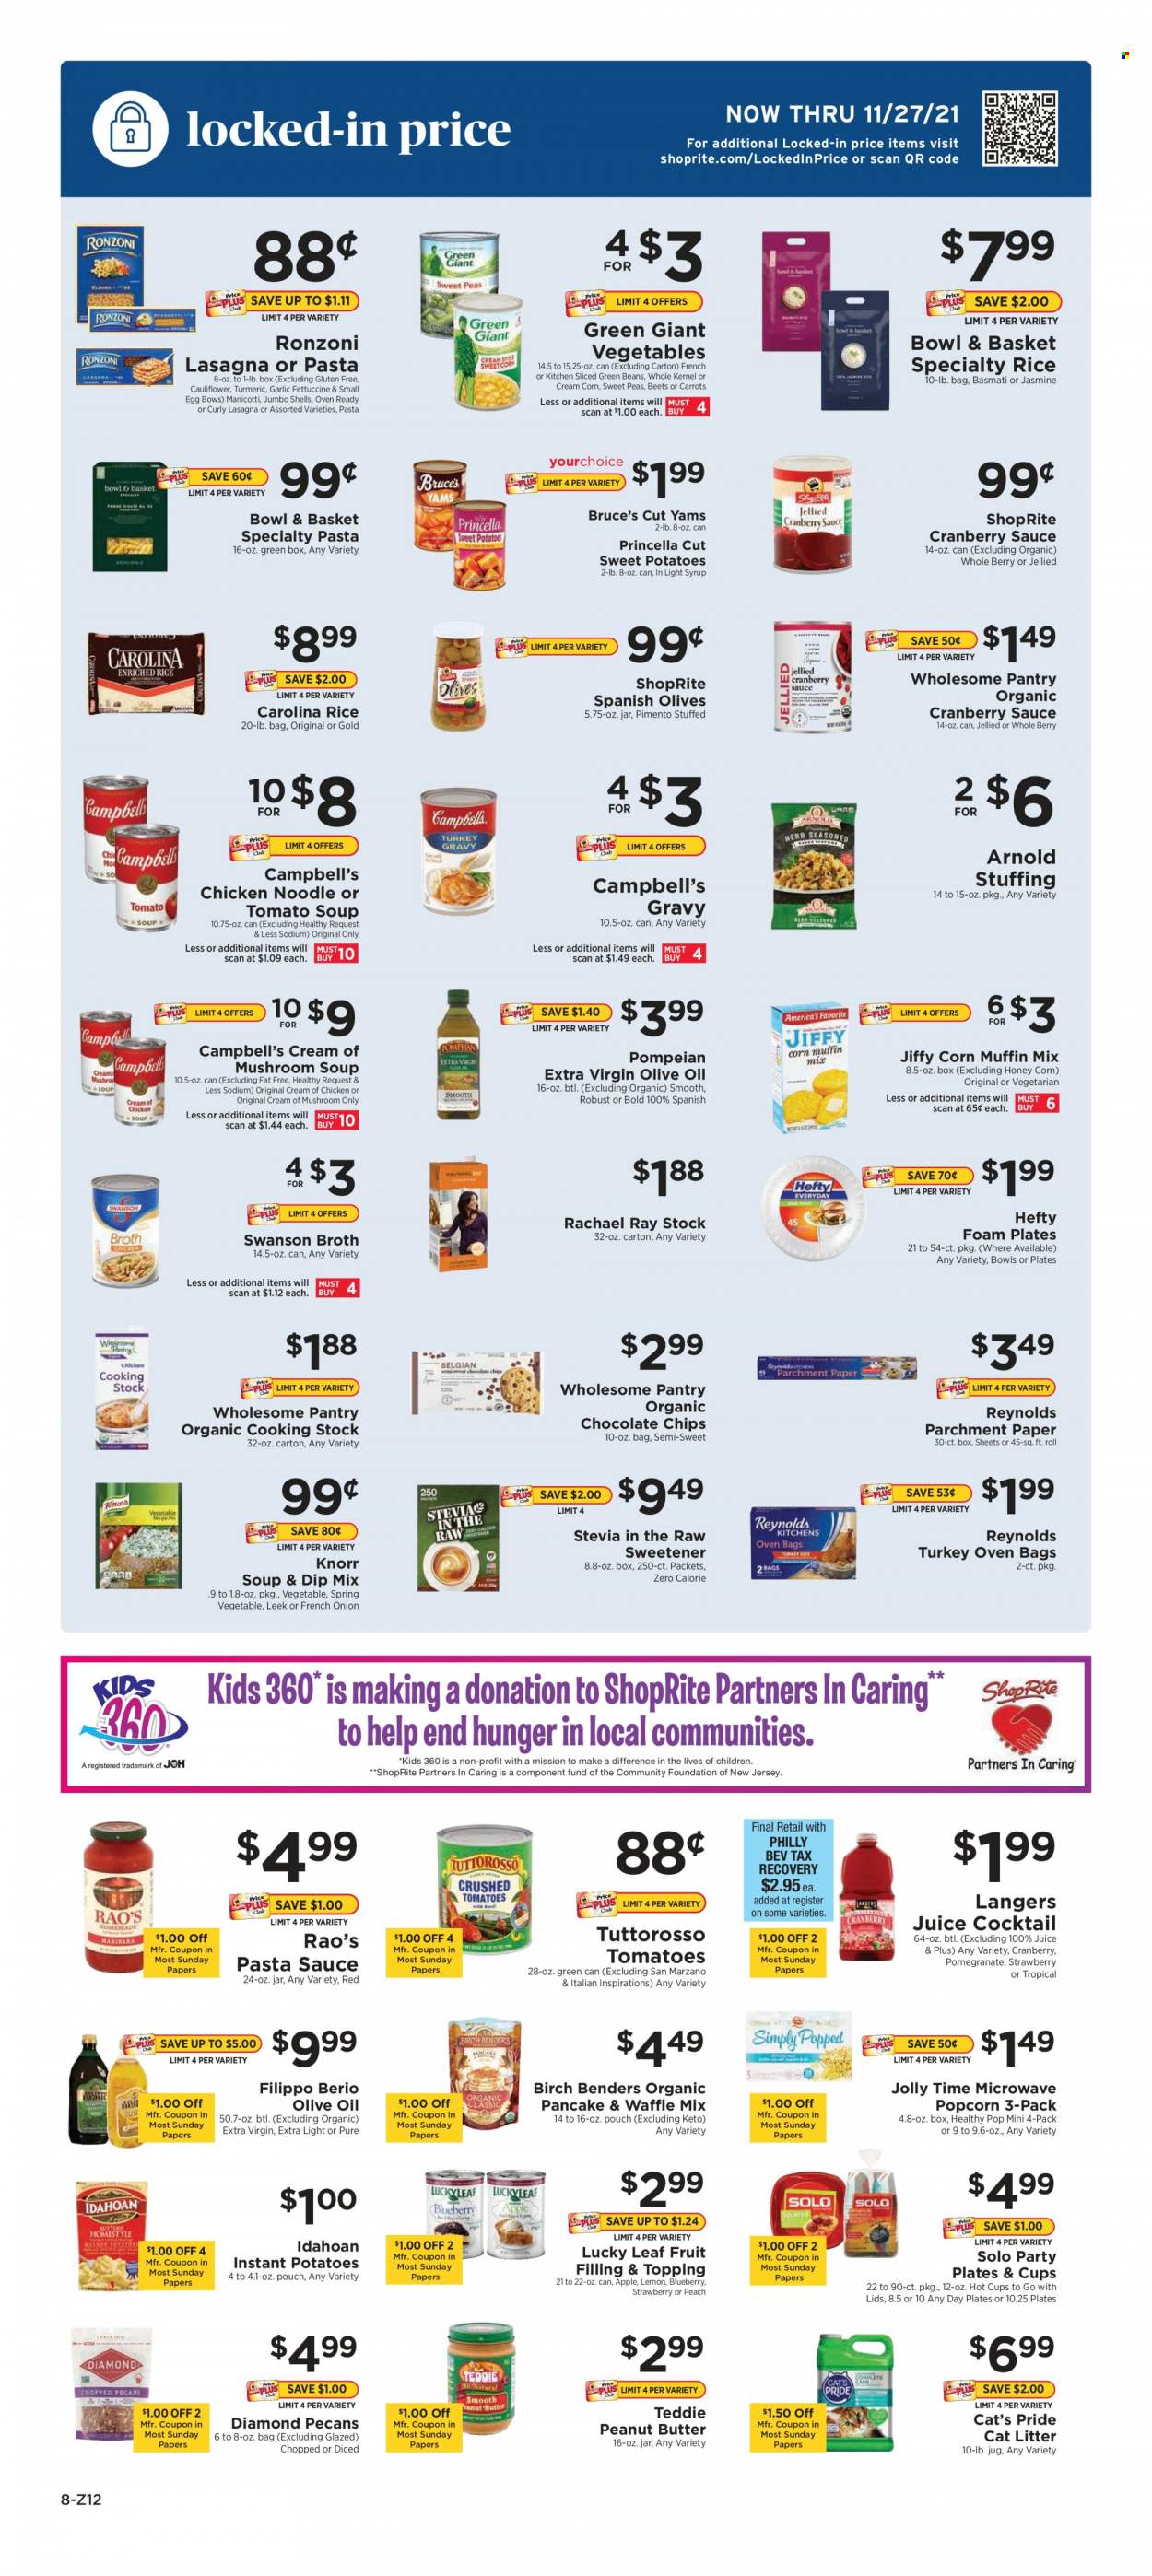 thumbnail - ShopRite Flyer - 11/07/2021 - 11/13/2021 - Sales products - Bowl & Basket, carrots, corn, garlic, green beans, leek, sweet potato, tomatoes, Campbell's, mushroom soup, tomato soup, pasta sauce, soup, Knorr, sauce, pancakes, noodles, lasagna meal, eggs, dip, popcorn, topping, broth, stevia, sweetener, olives, basmati rice, rice, turmeric, extra virgin olive oil, olive oil, oil, cranberry sauce, honey, peanut butter, syrup, pecans, juice, Hefty, plate, cup, paper, foam plates, cat litter, pomegranate. Page 8.